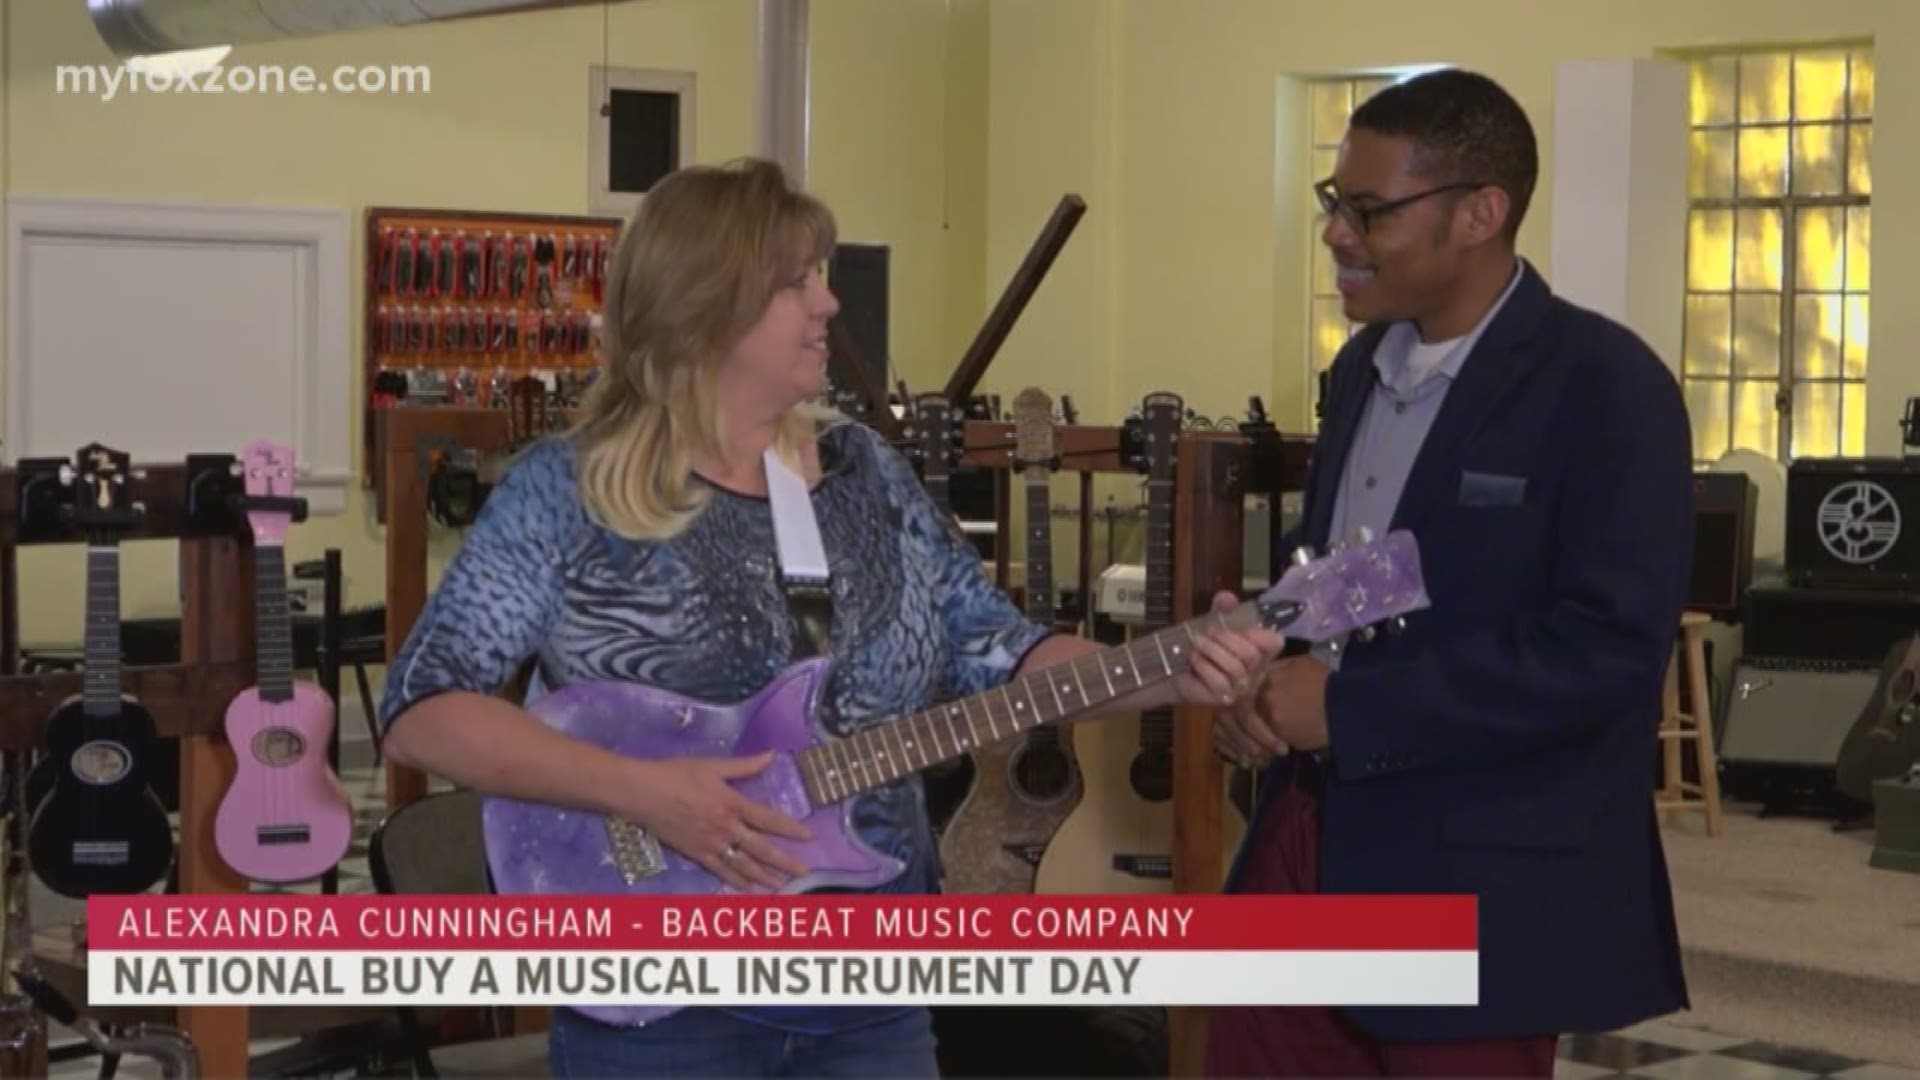 Our Malik Mingo speaks with Backbeat Music Company about some tips on buying an instrument.